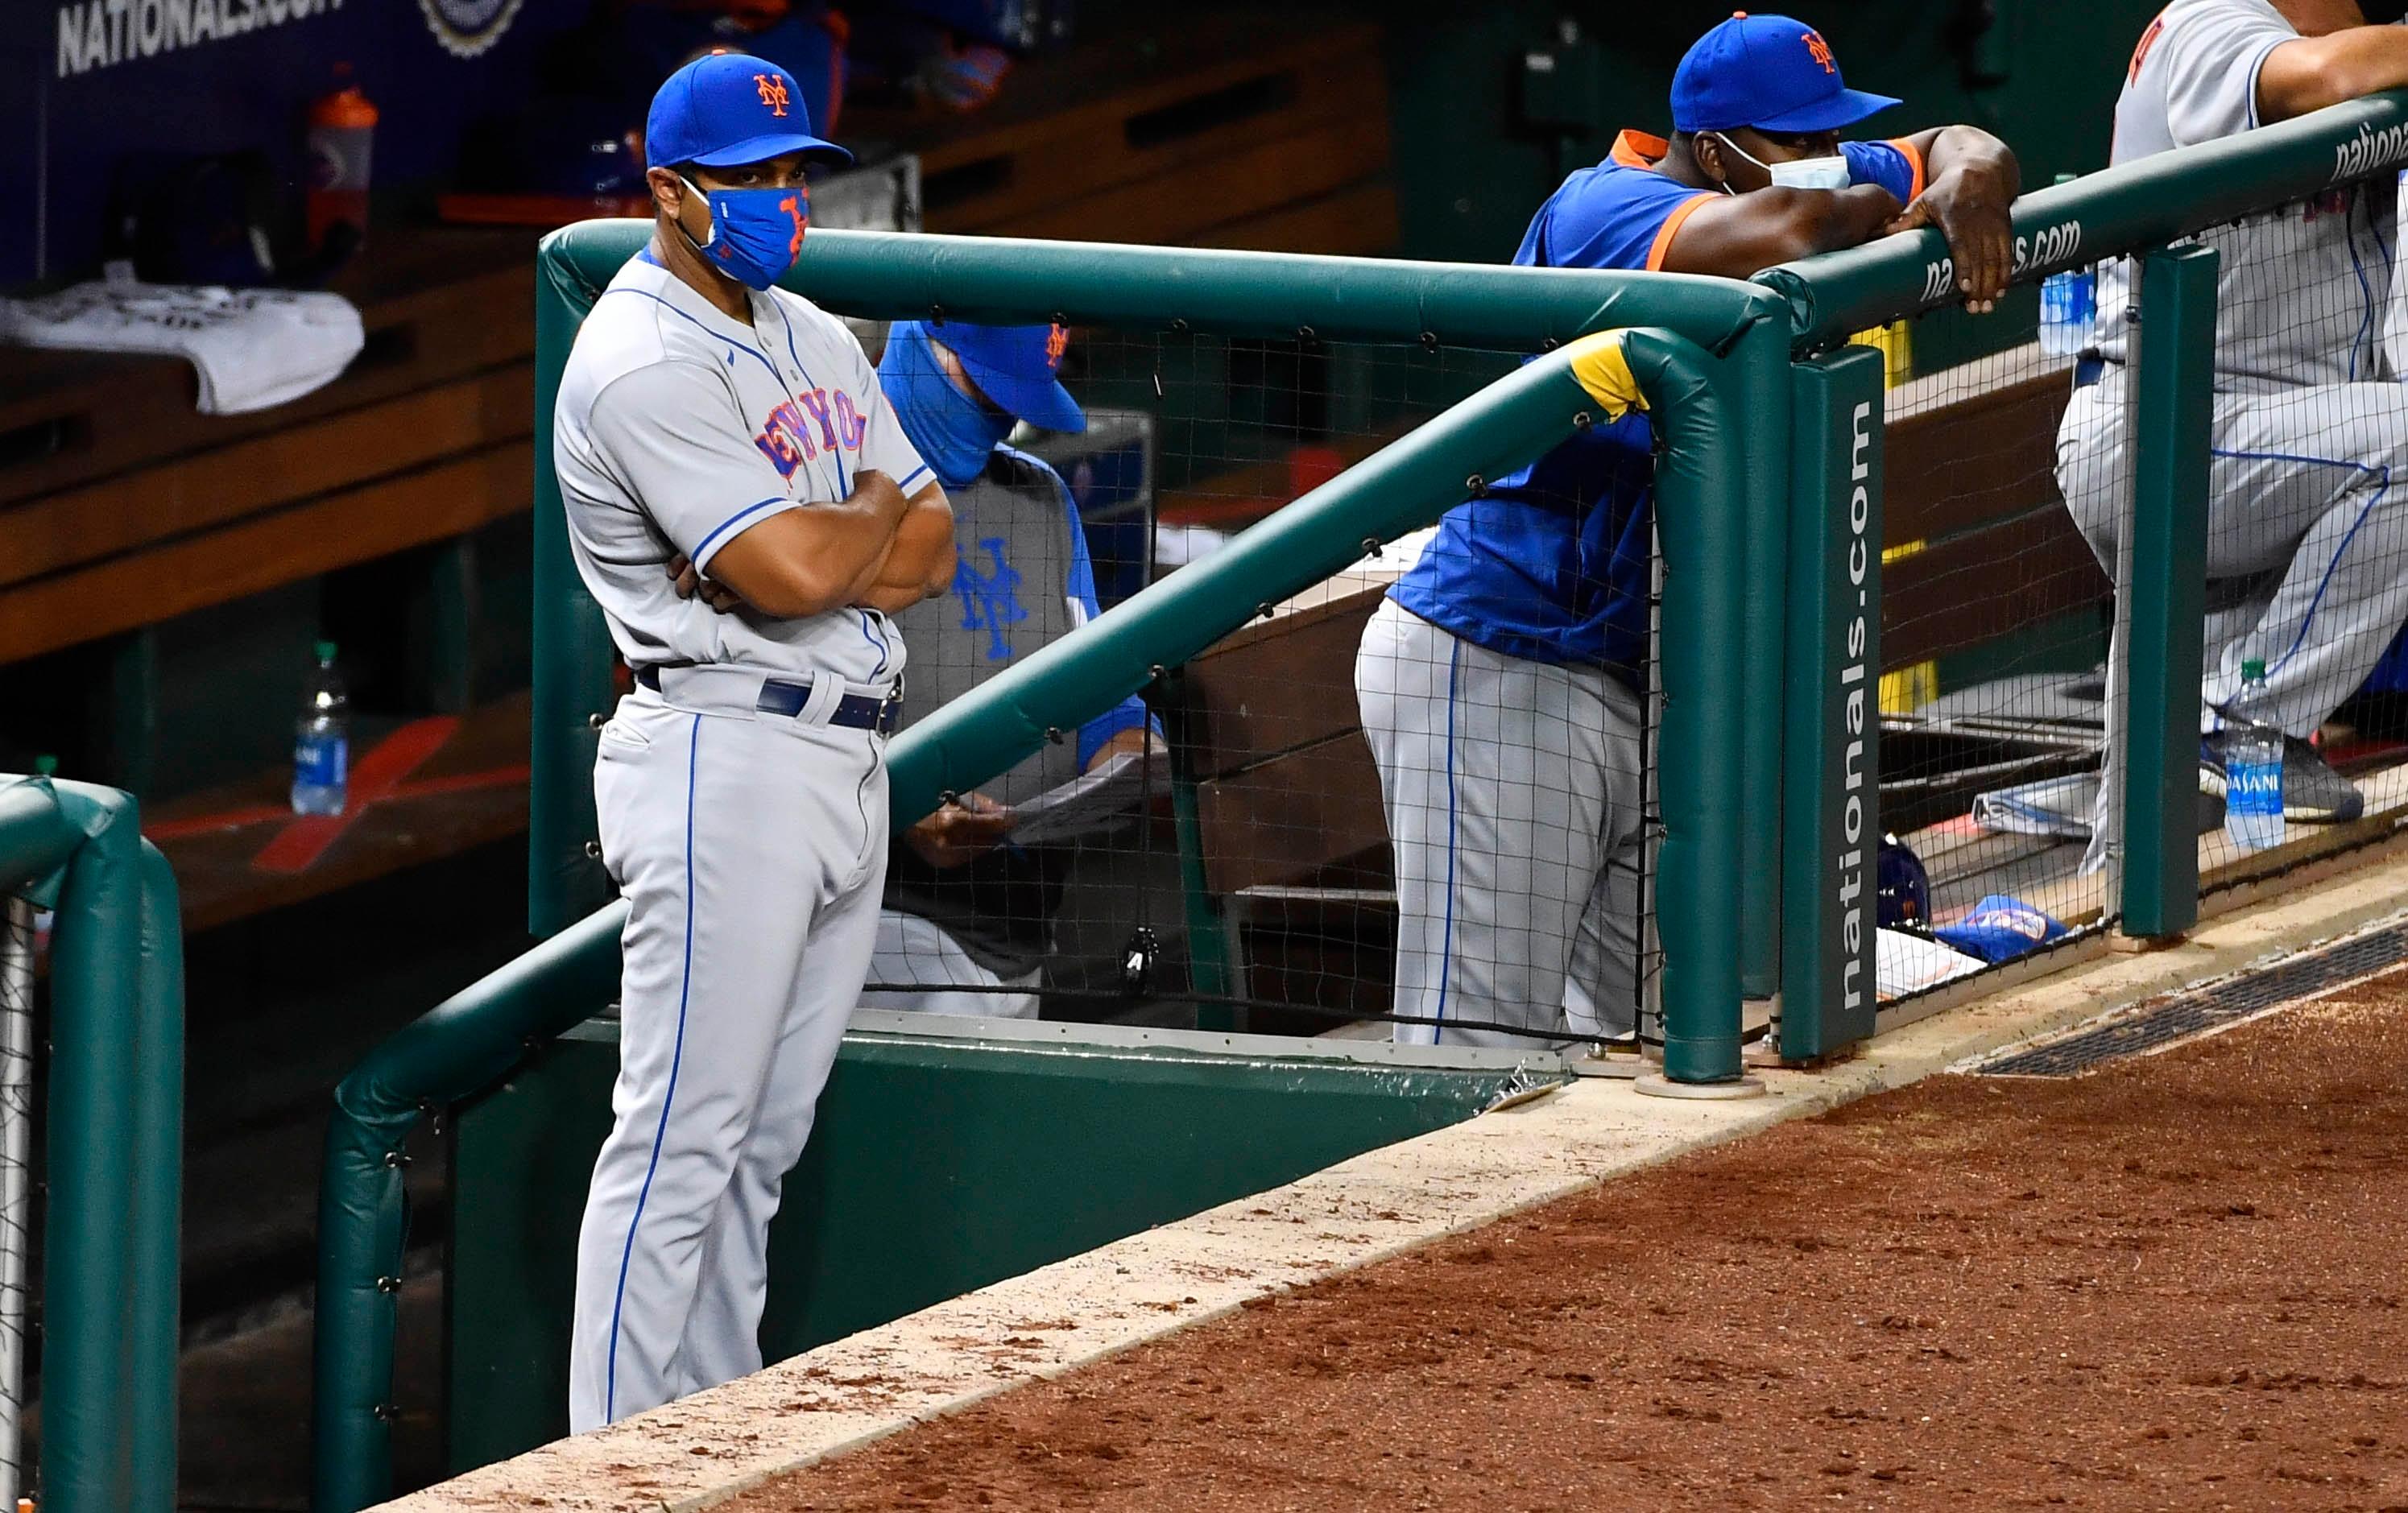 Aug 4, 2020; Washington, District of Columbia, USA; New York Mets manager Luis Rojas (19) looks on against the Washington Nationals during the fifth inning at Nationals Park. Mandatory Credit: Brad Mills-USA TODAY Sports / Brad Mills-USA TODAY Sports